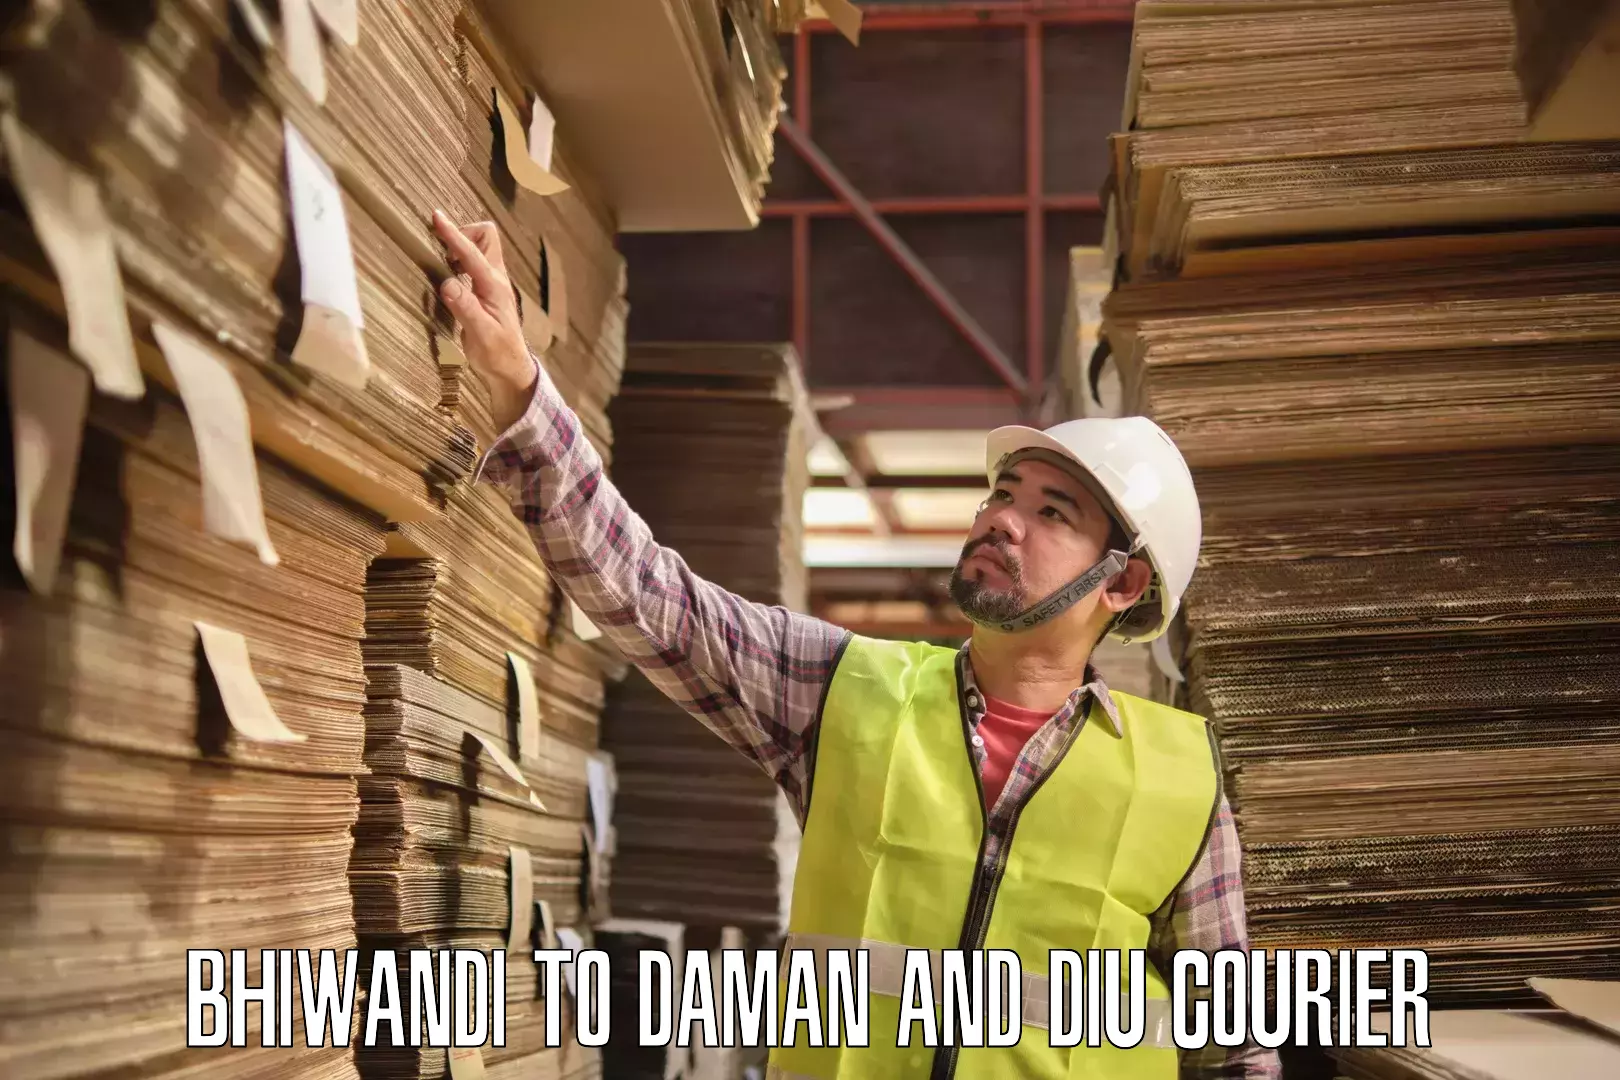 Courier service comparison Bhiwandi to Daman and Diu